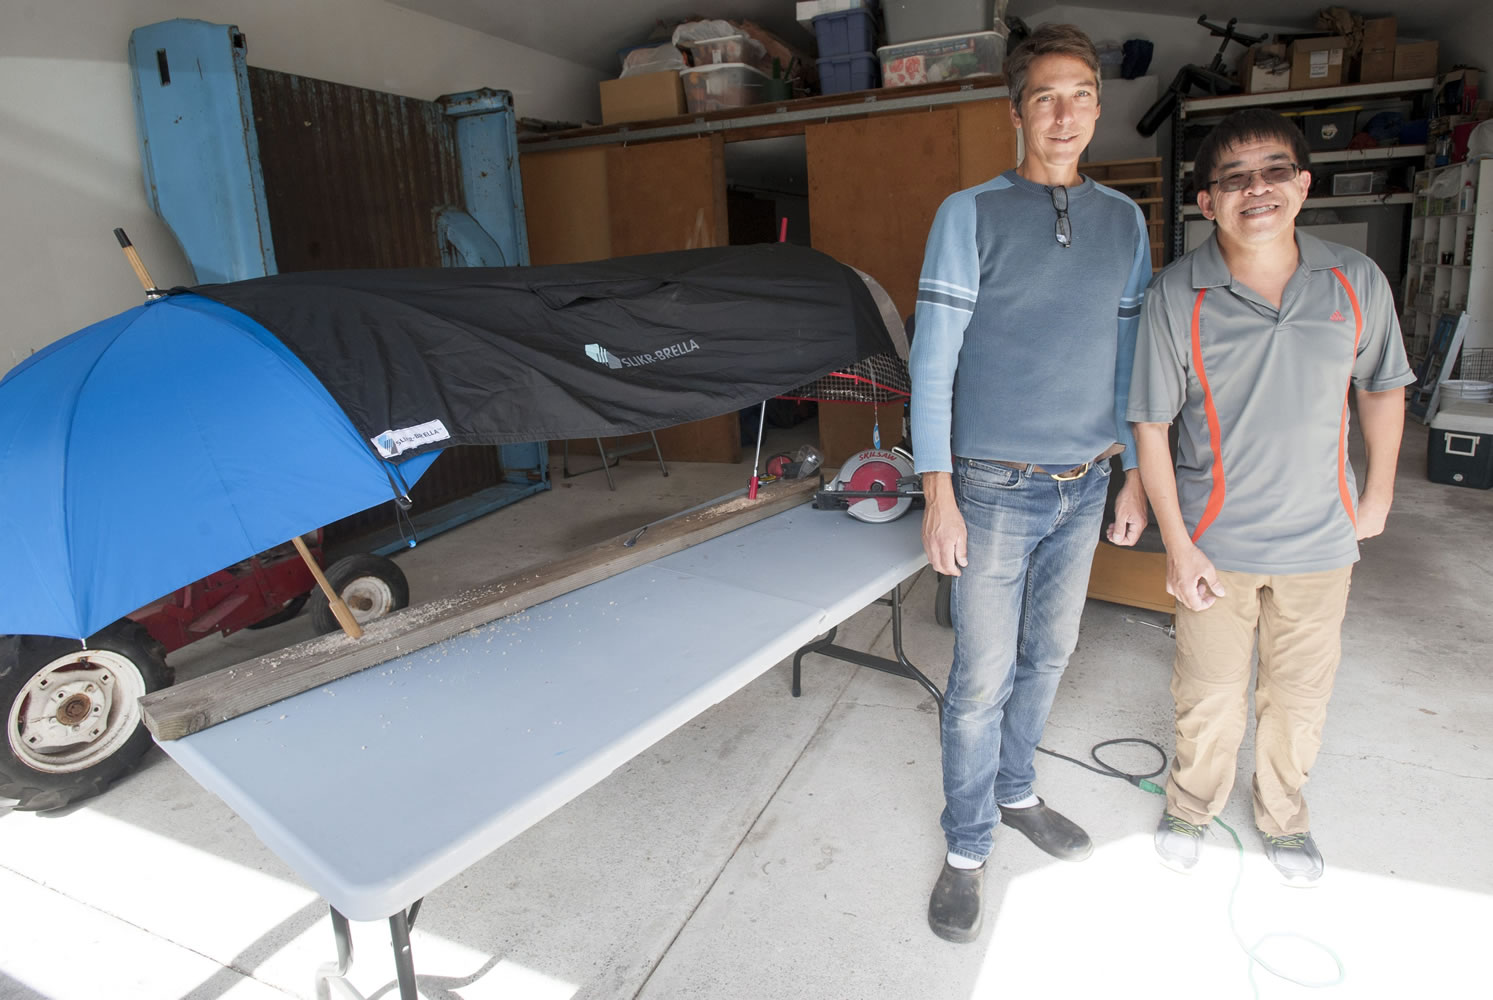 Chris Gibbons and Kevin Chong stand in front of one of their Slikr-Brellas at Gibbons’ home in Vancouver. The men displayed their procut, a poncho that hooks over umbrellas to create a tent that can be used on the sidelines of sporting events, at the recent Wak, Roll ‘n Run event in Portland, a fundraiser for United Cerebral Palsy of Oregon. They plan to put any profits from the sale of their product into a new non-profit to help disabled people learn about finance and business basics.